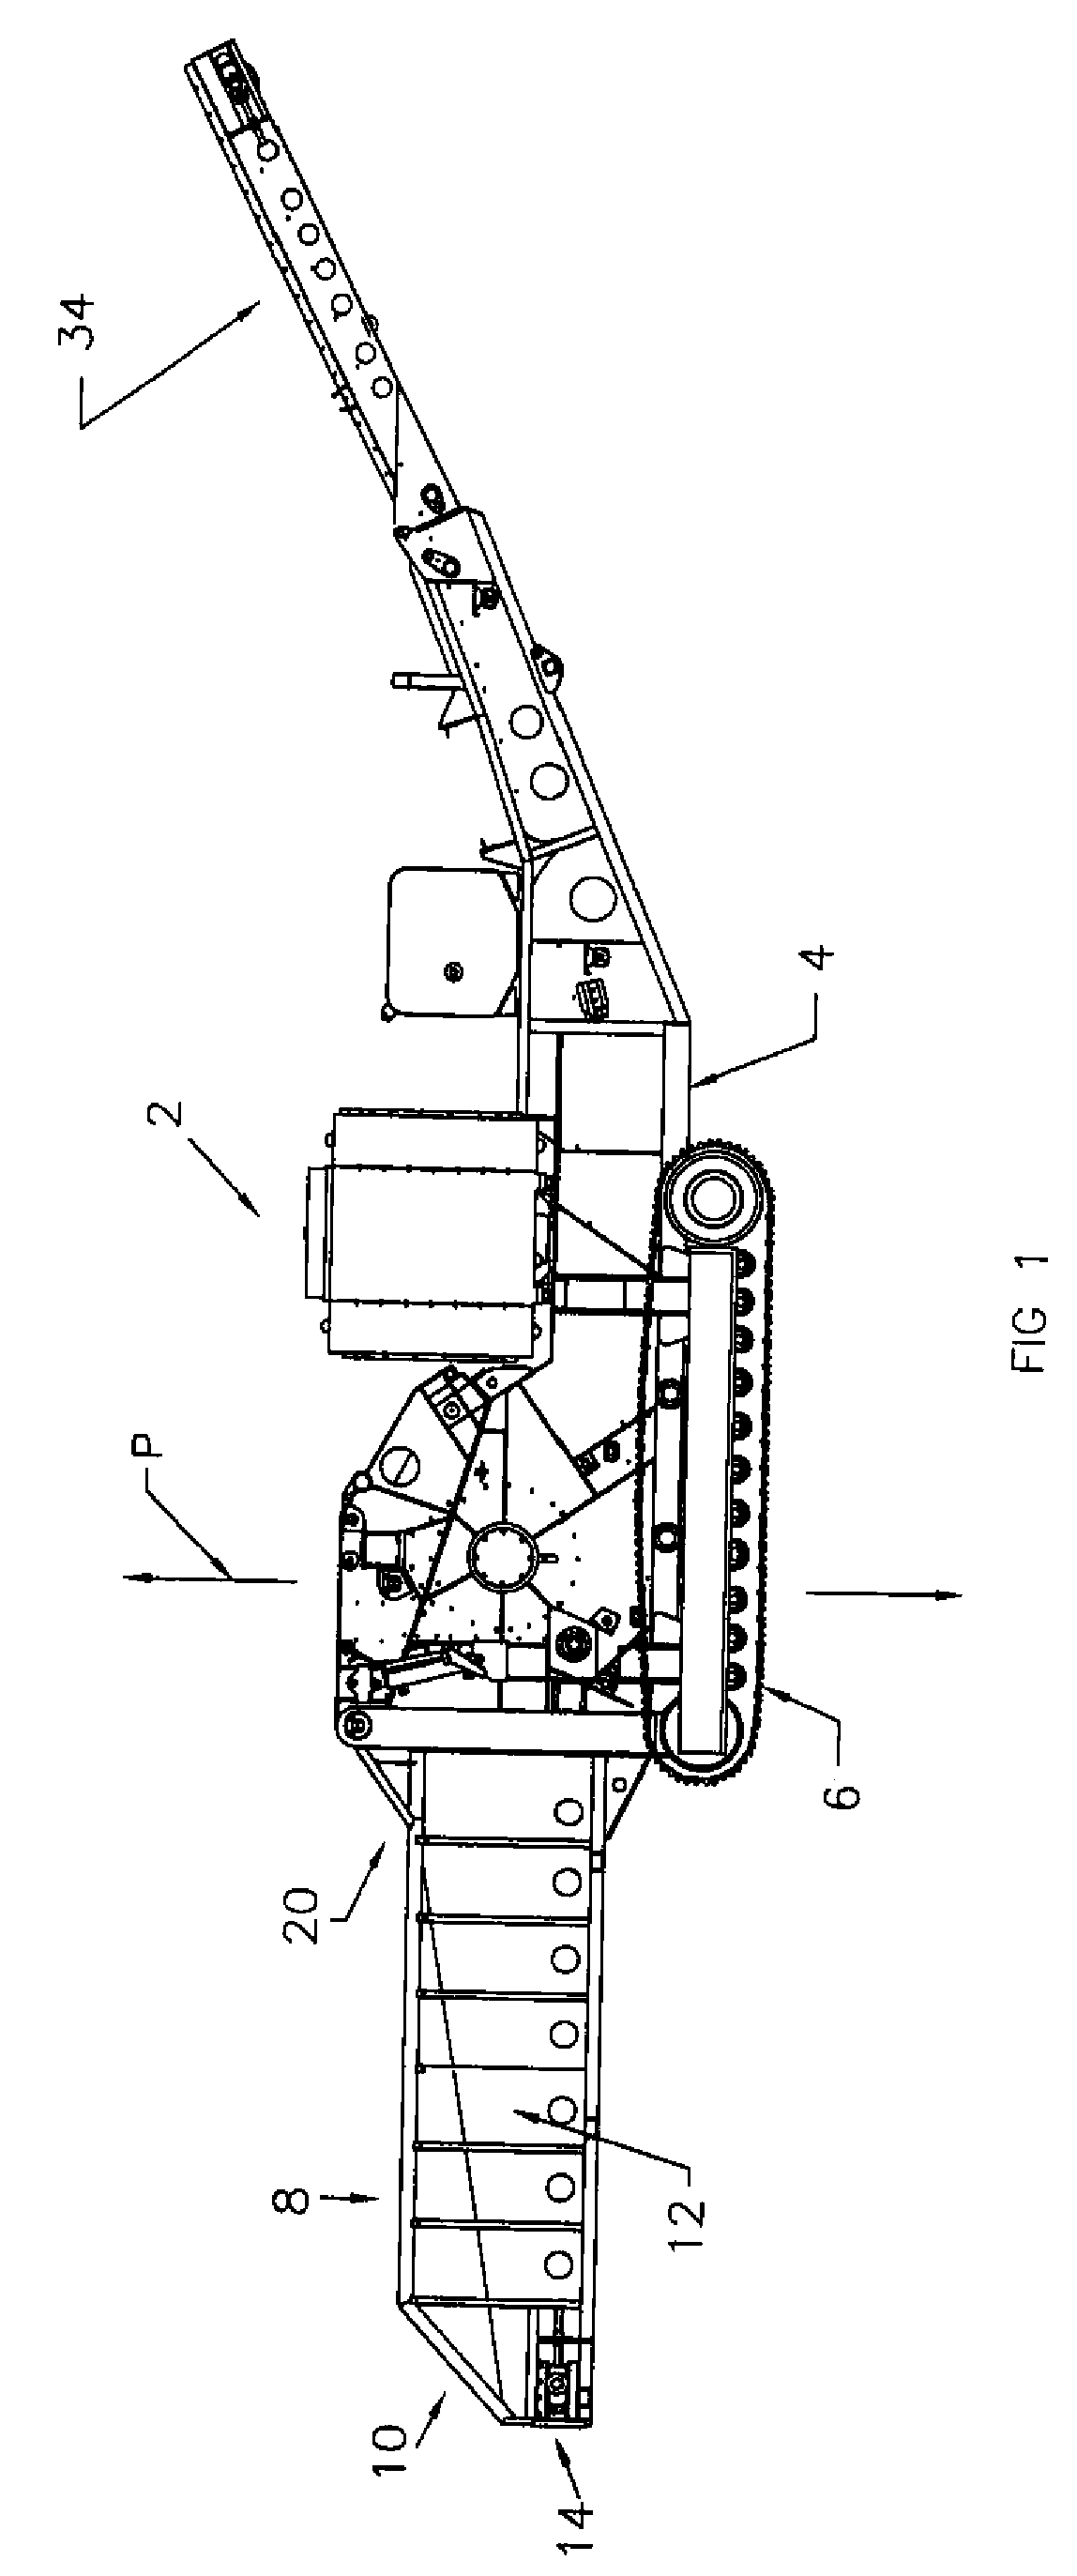 Failsafe system for material apparatus